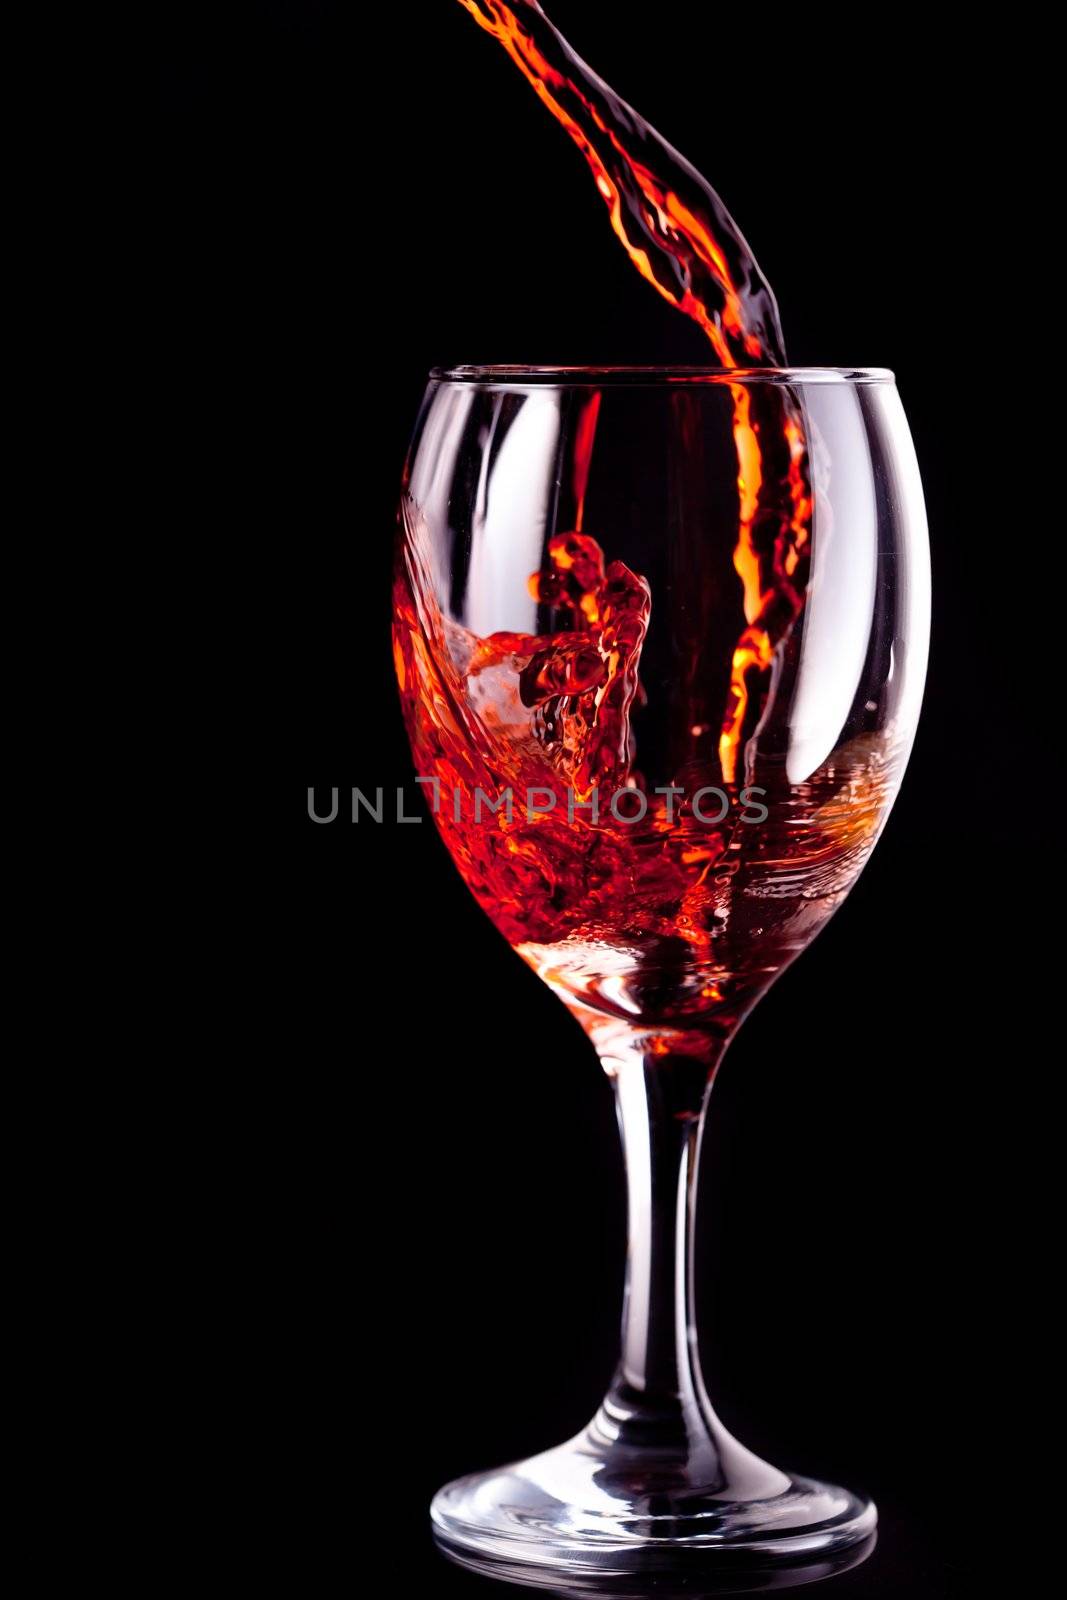 Empty glass being filled with wine by Wavebreakmedia